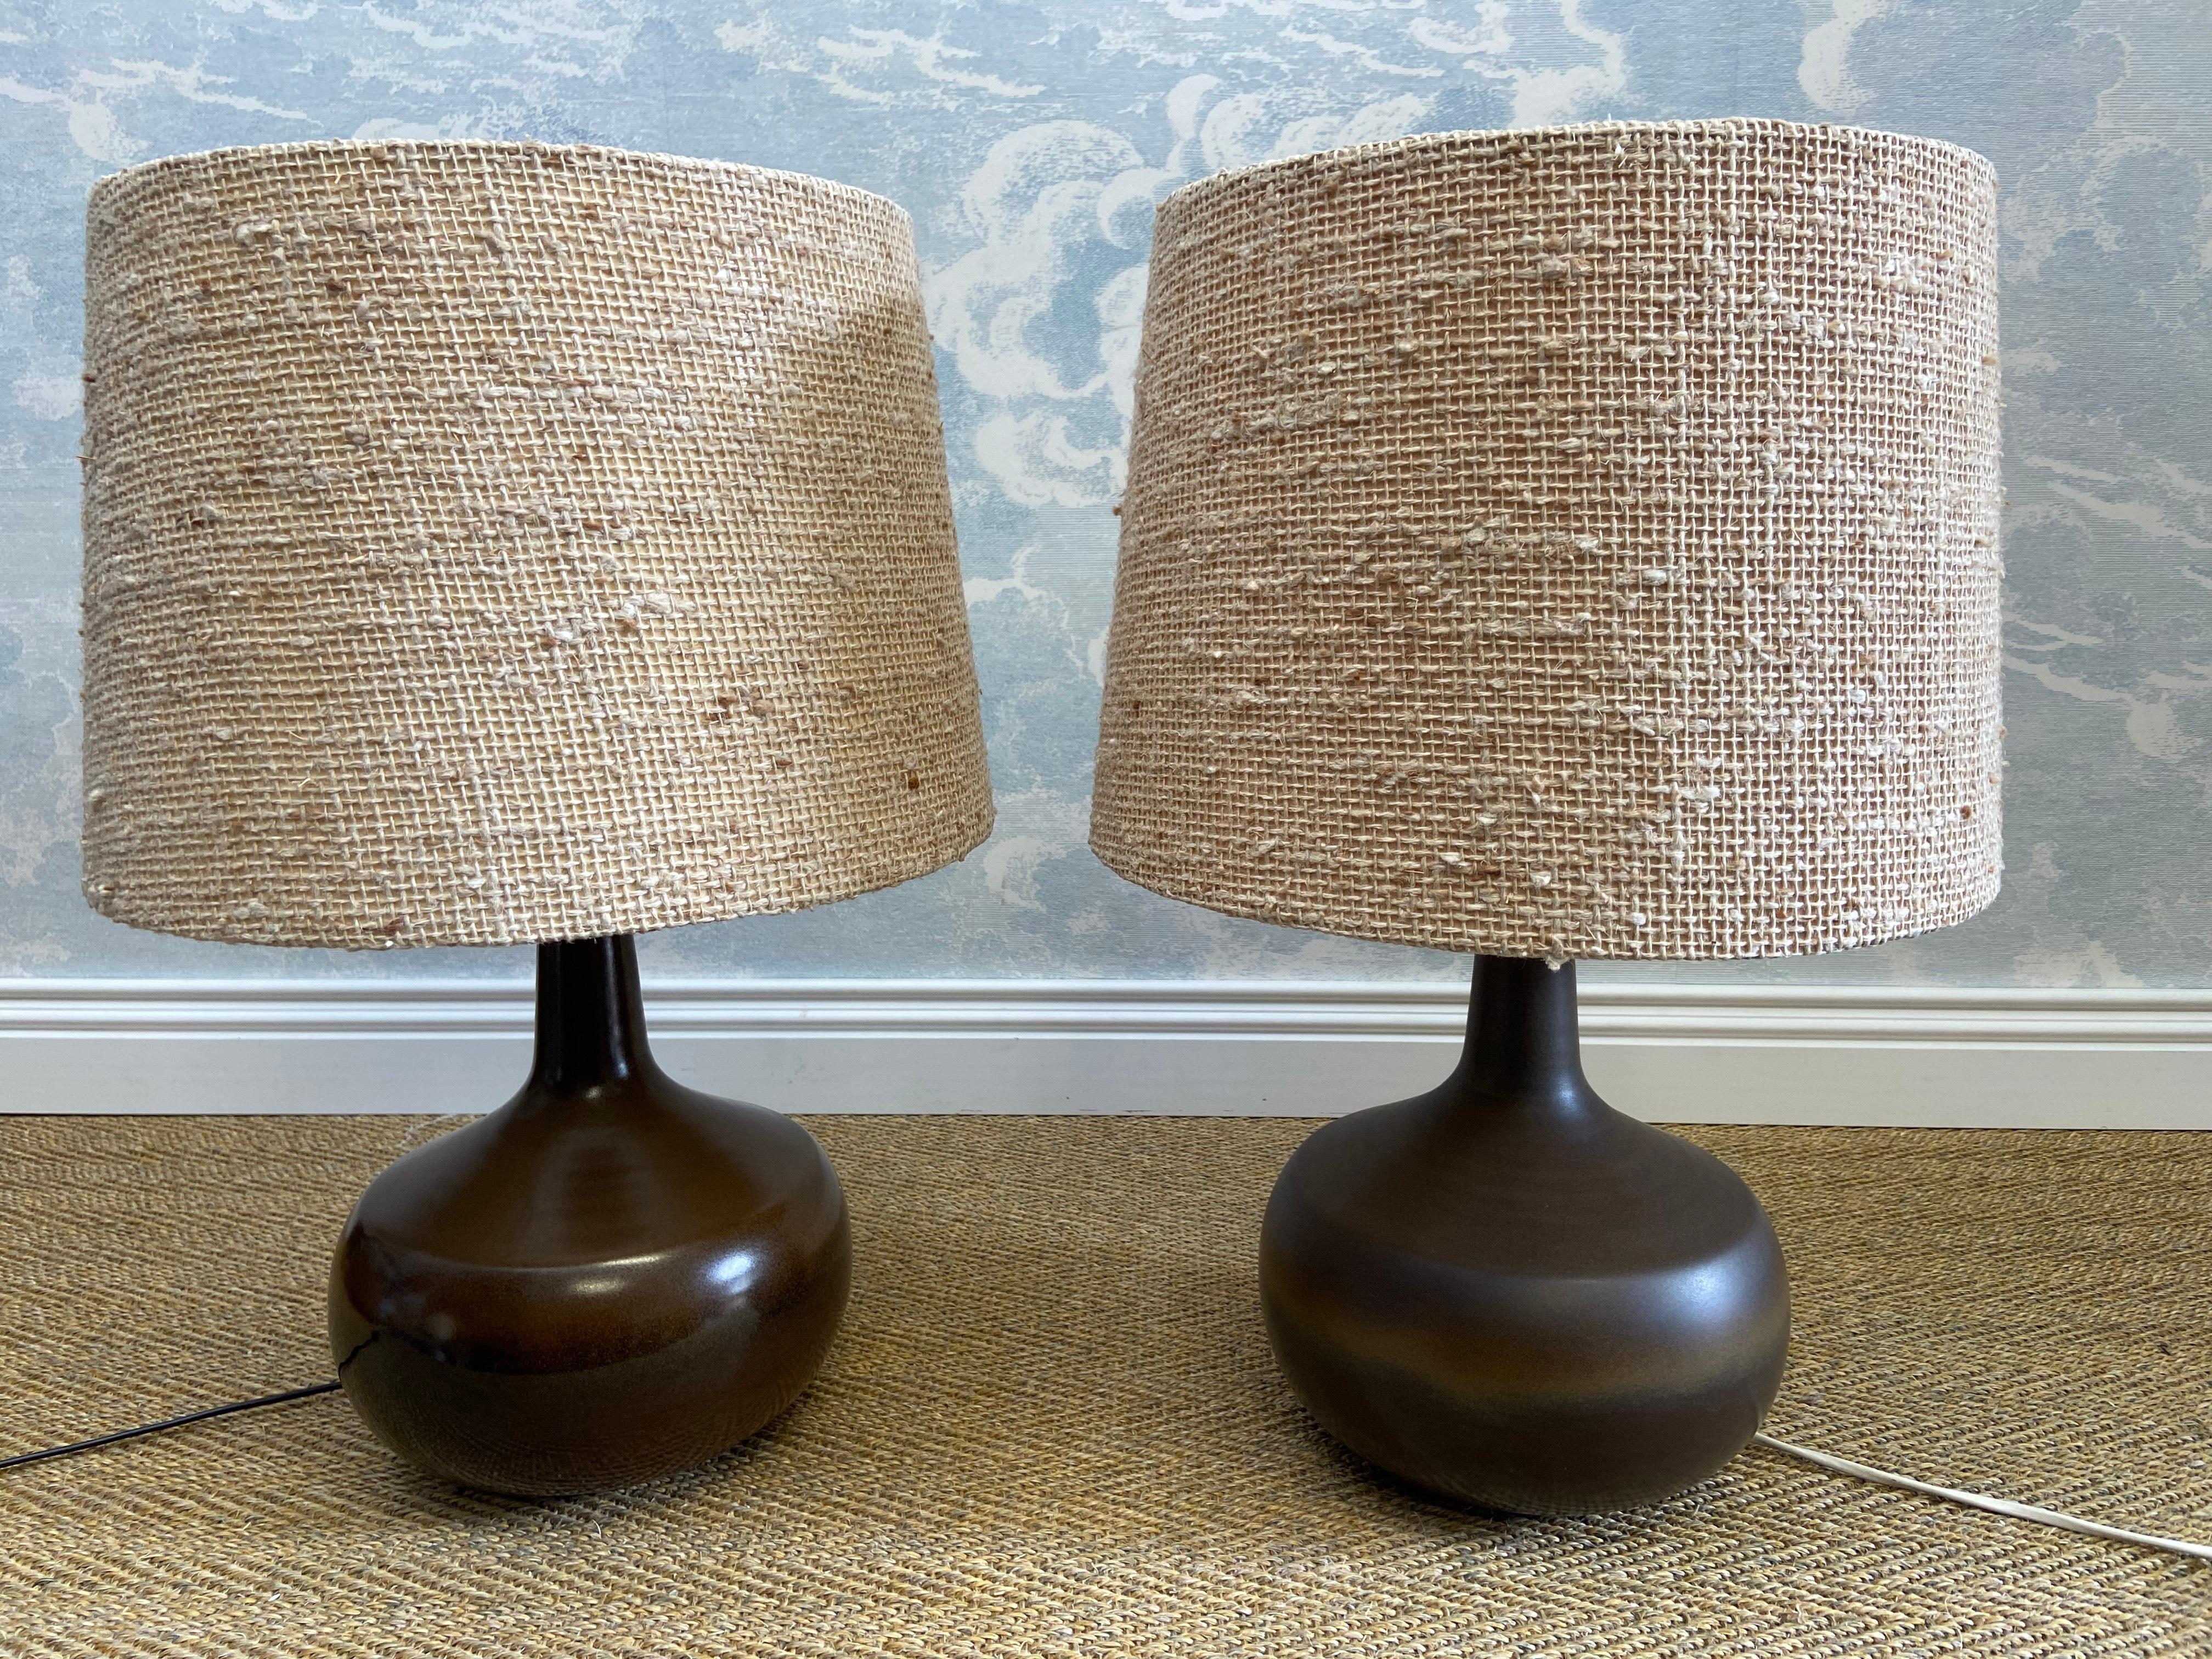 This pair of Rosenthal Studio Line Table Lamps was manufactured in Bavaria in the 1960's.

Renowned for their high quality porcelain products Rosenthal branched out into home-furnishings in the second half of the 20th century and this pair of